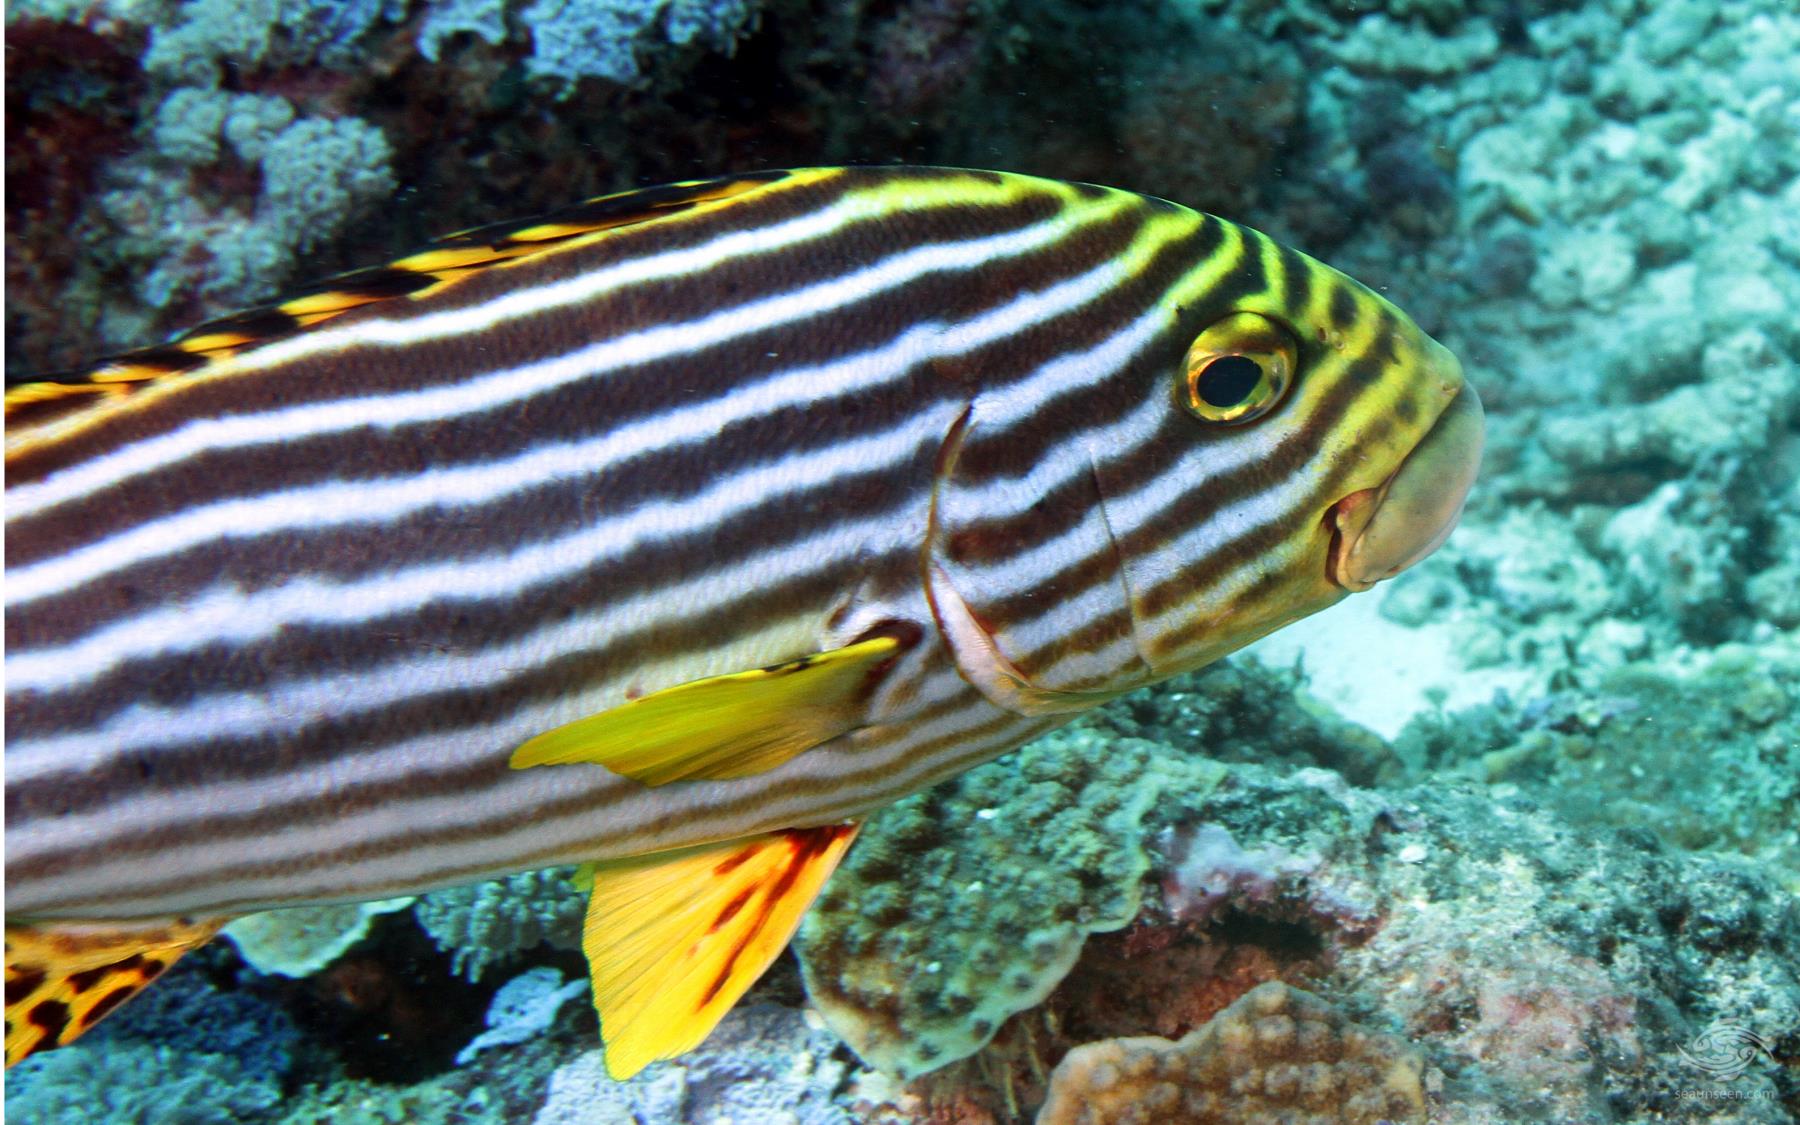 Oriental Sweetlips - Facts and Photographs - Seaunseen